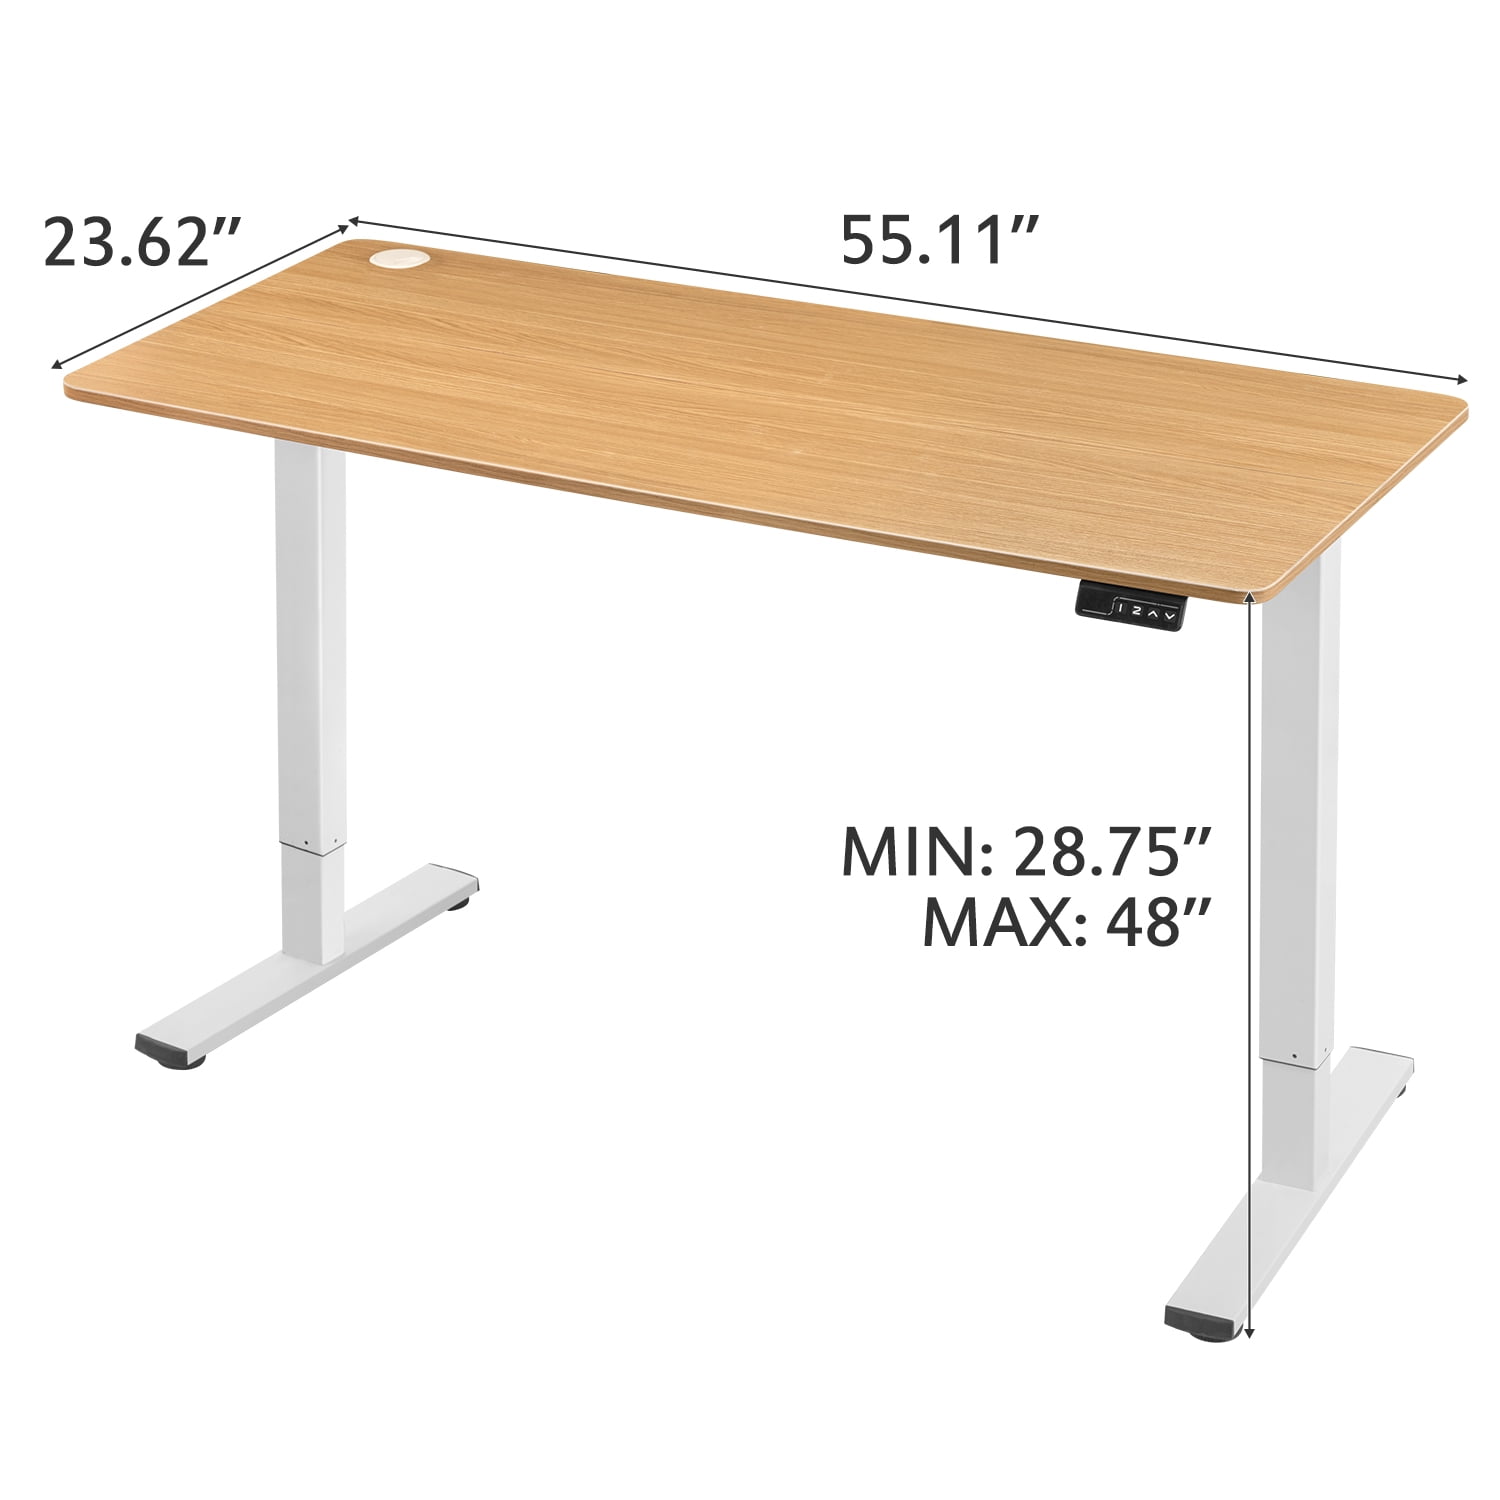 Homall 48 inch 24 inch Electric Height Adjustable Standing Desk Home Office Computer Desk Memory Preset with T-shaped Metal Bracket, Black&Wood, Beige